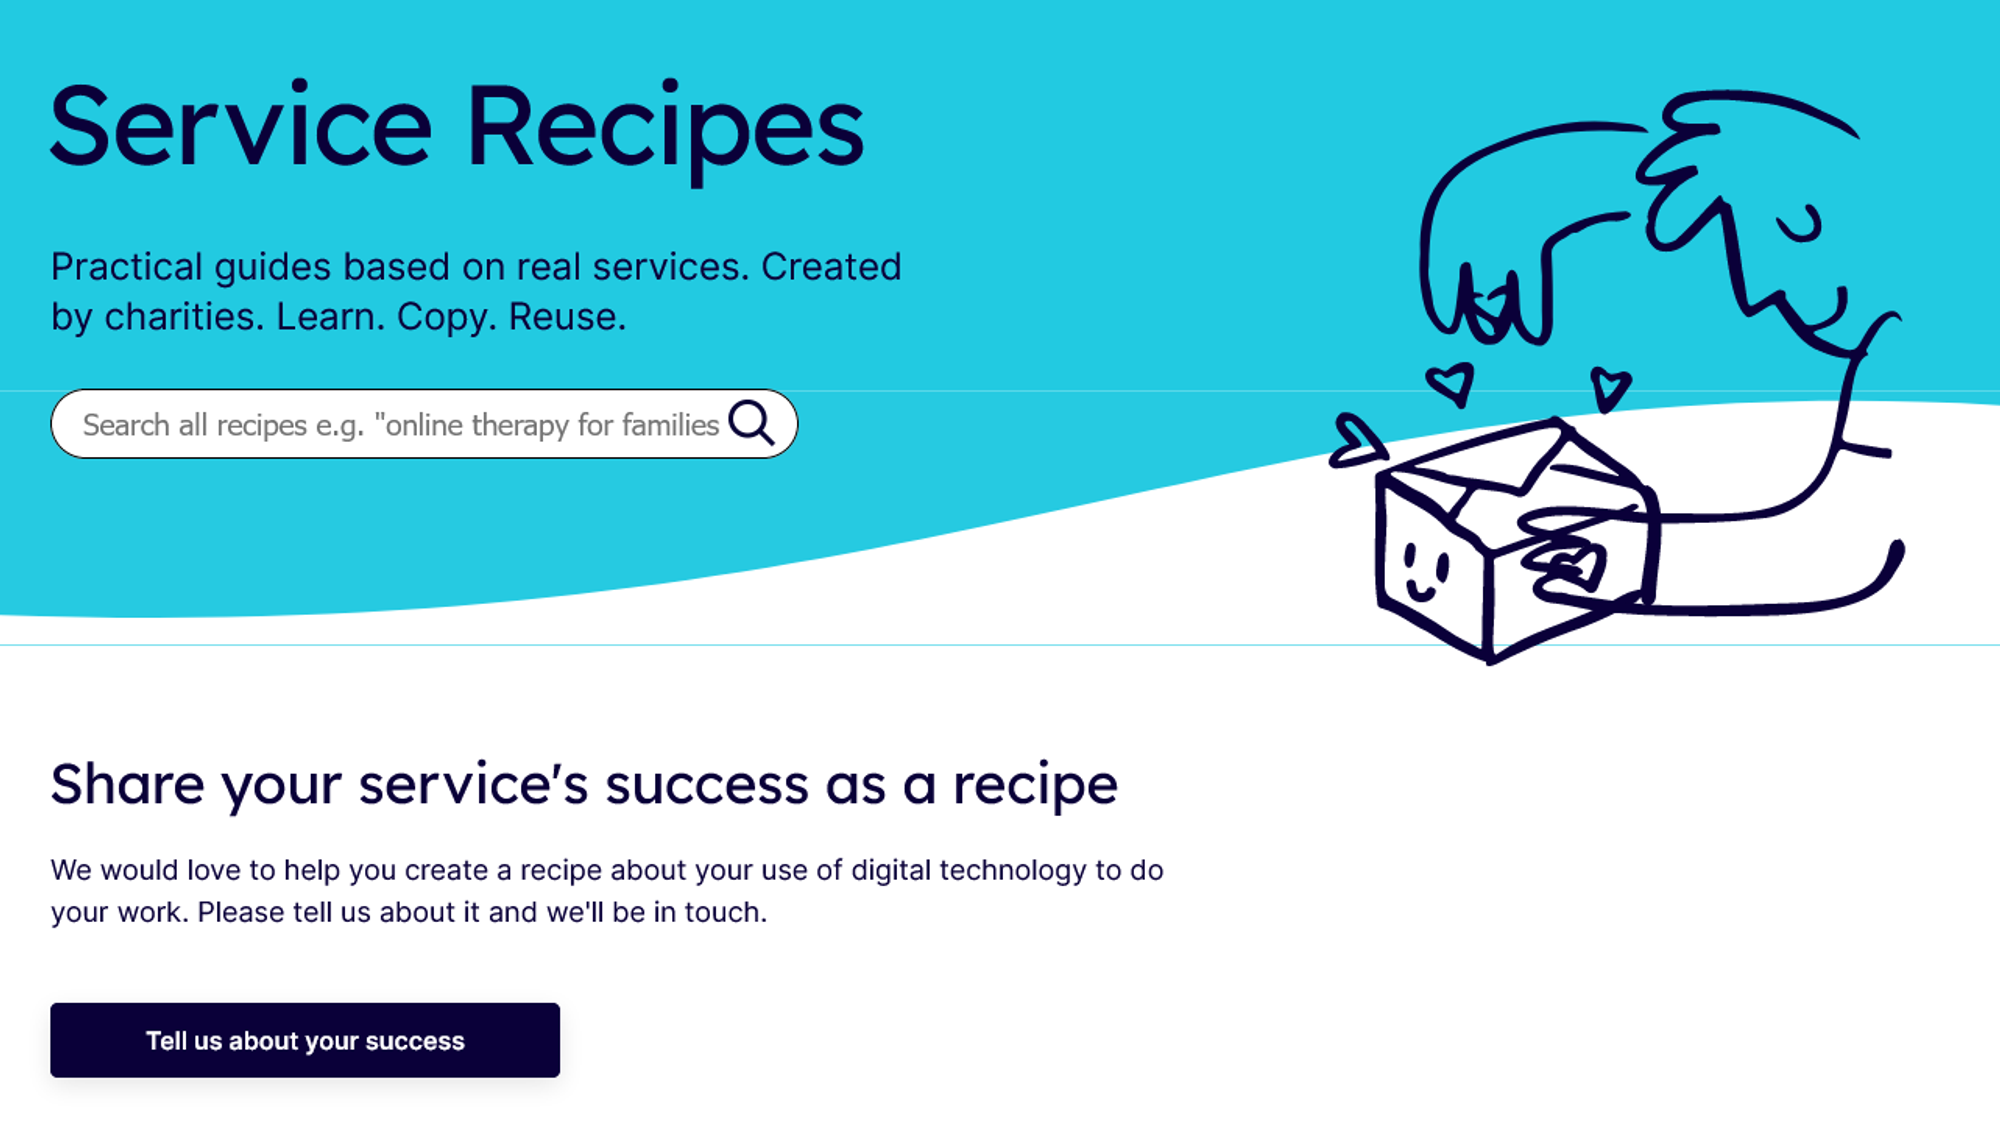 Service Recipes 🚀 led by Working with Joe